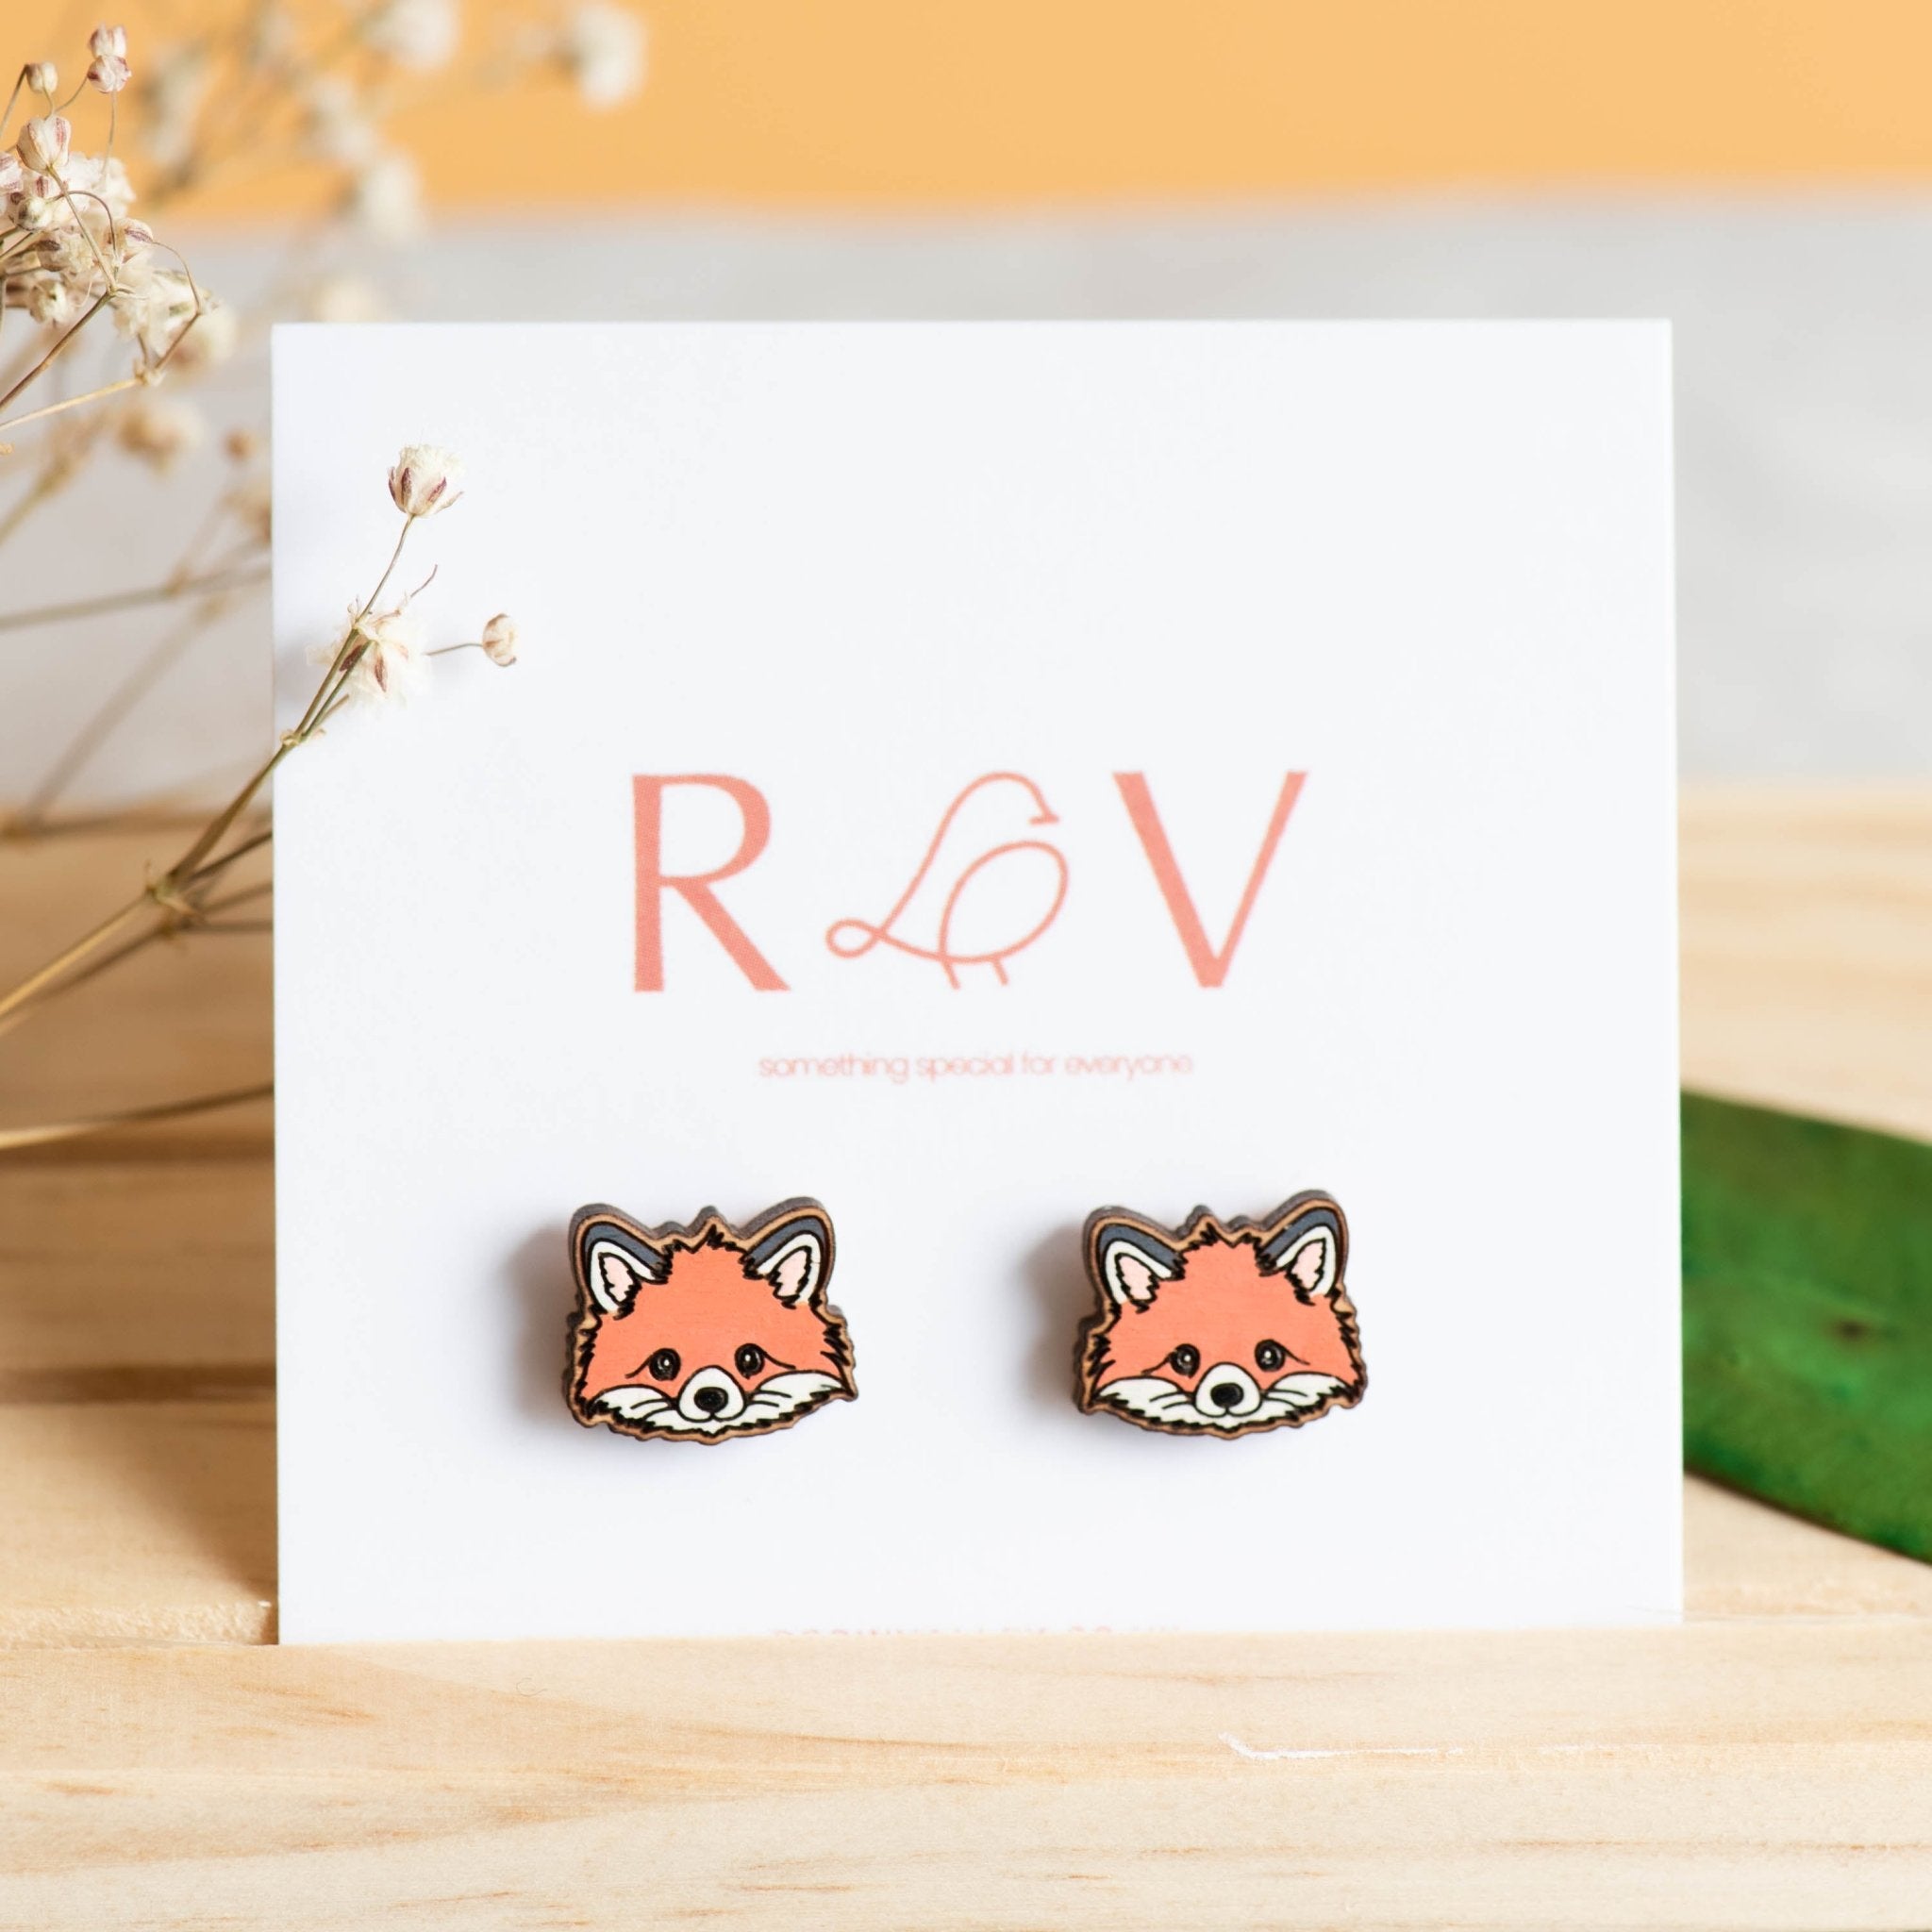 Hand-painted Red Fox Earrings Cherry Wood Earrings - PEL10178 - Robin Valley Official Store